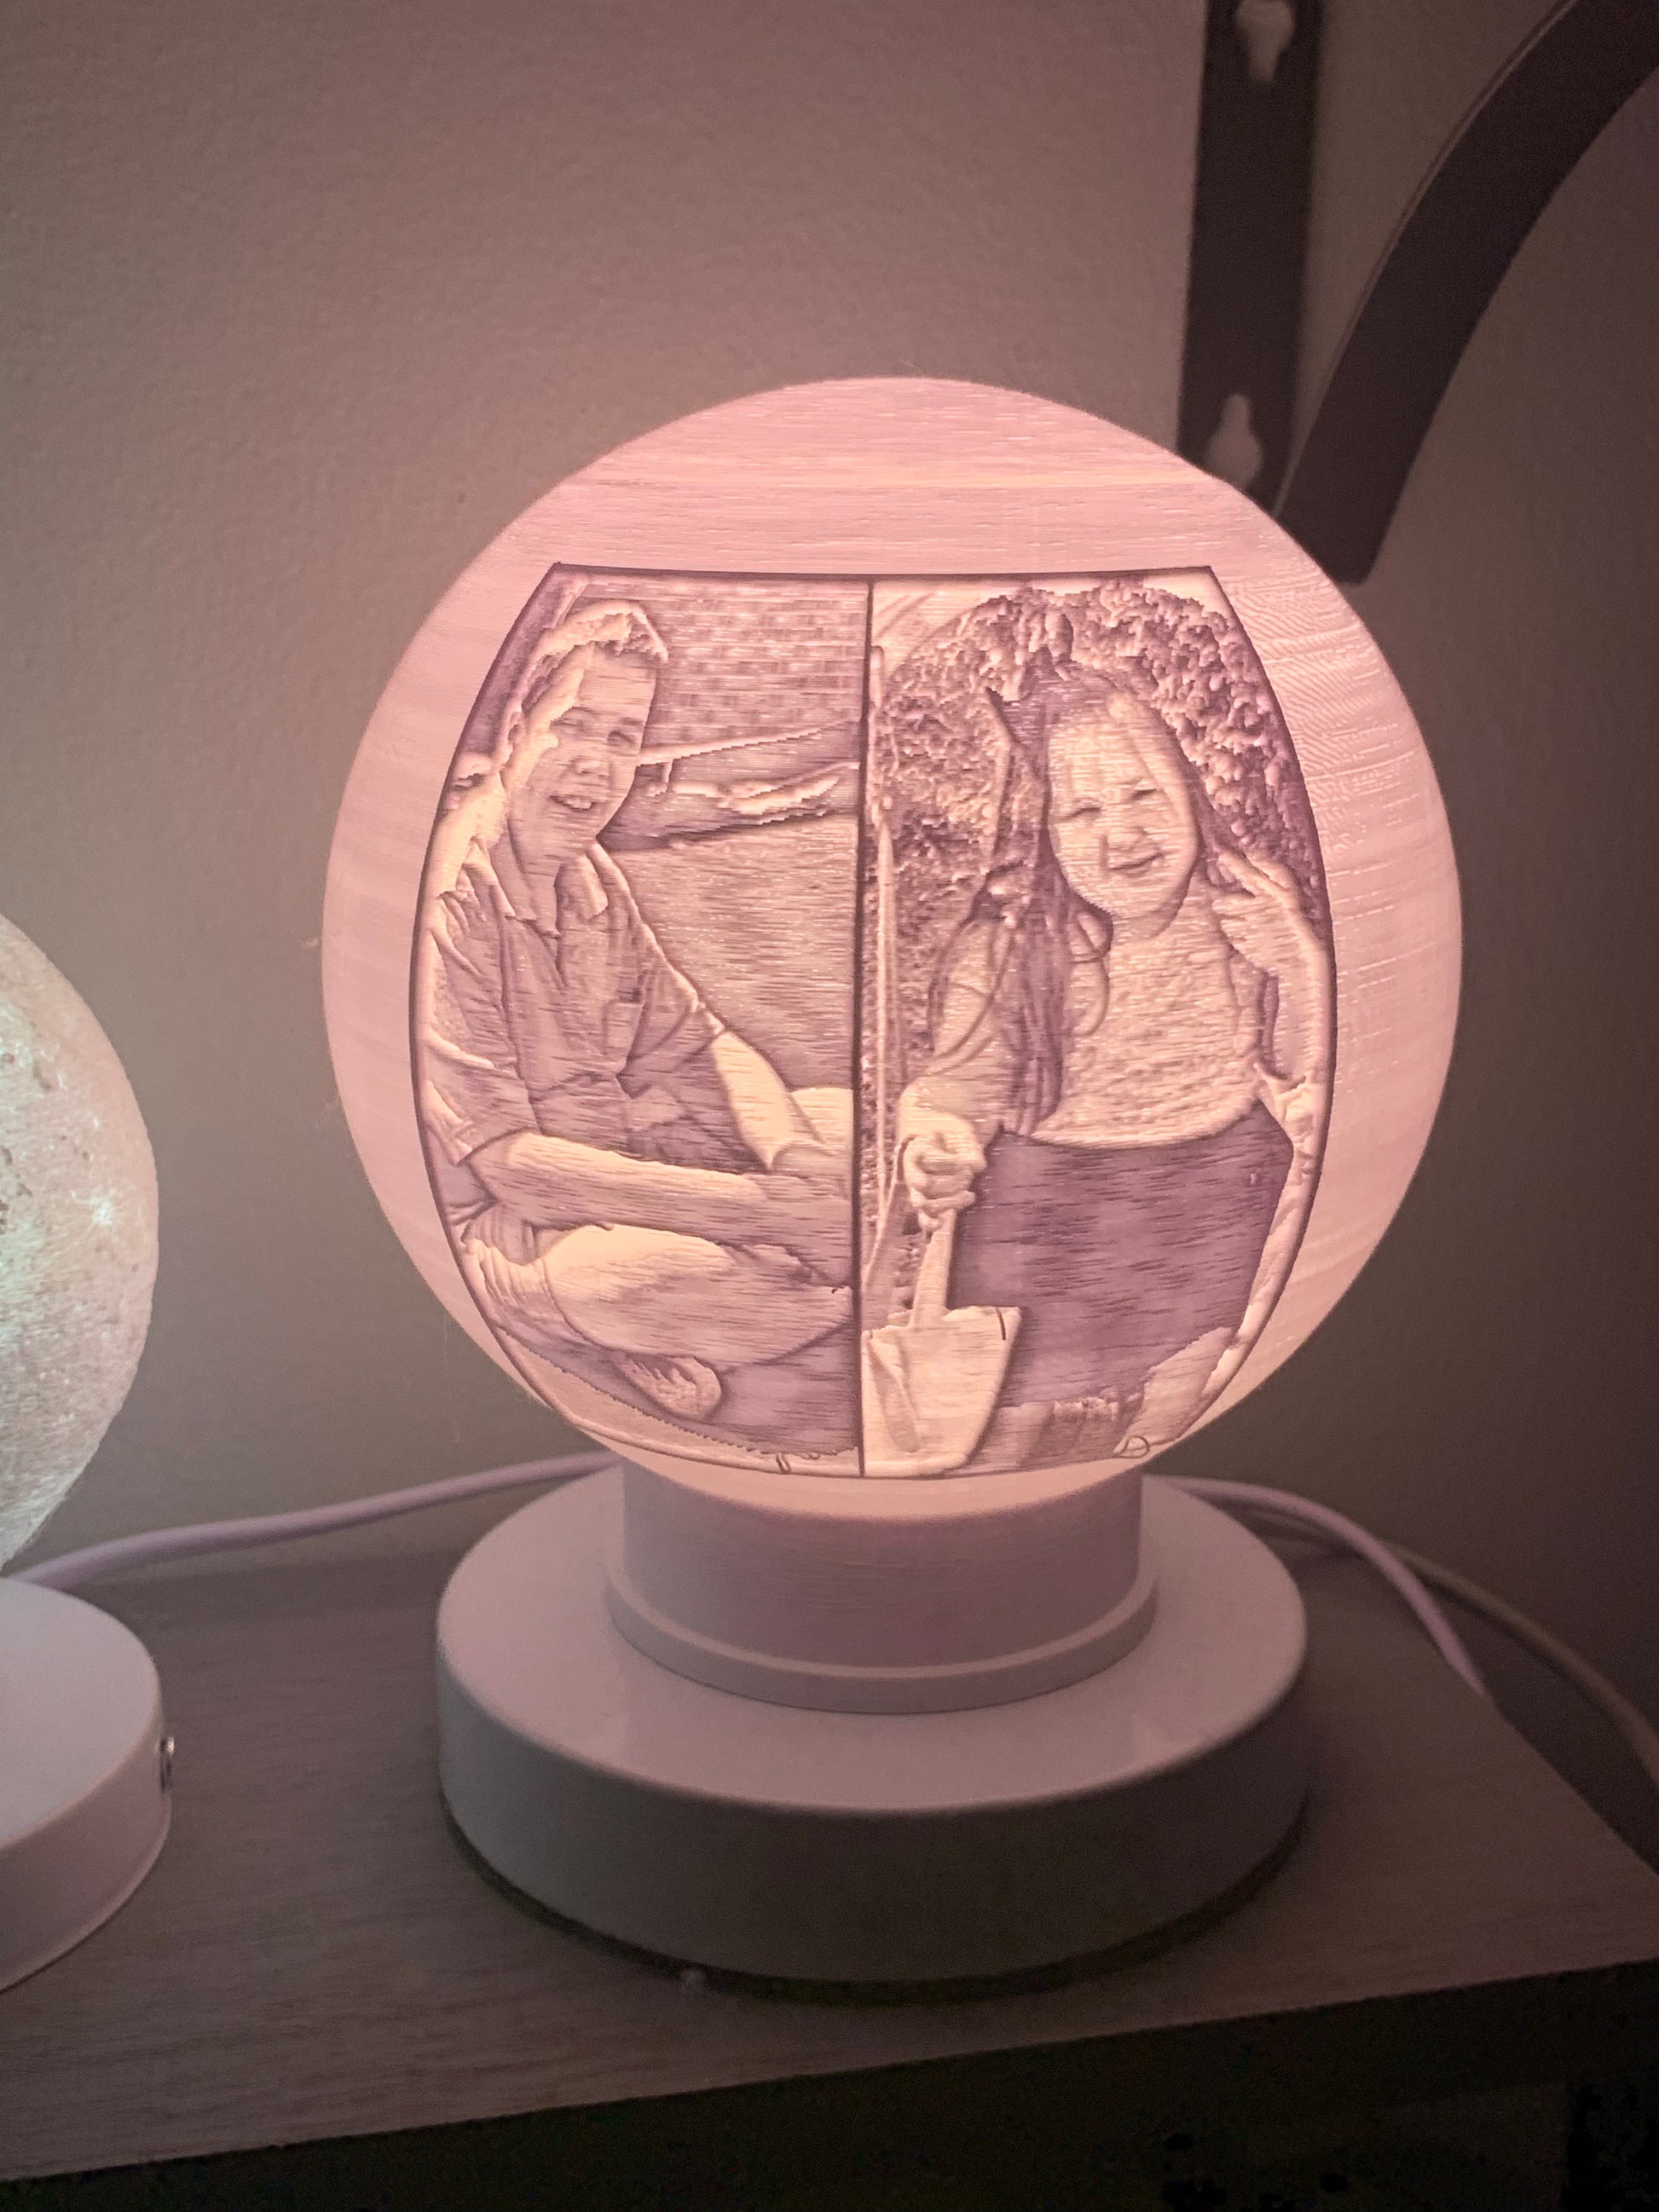 3D Printed Lithographic Moon Lamp